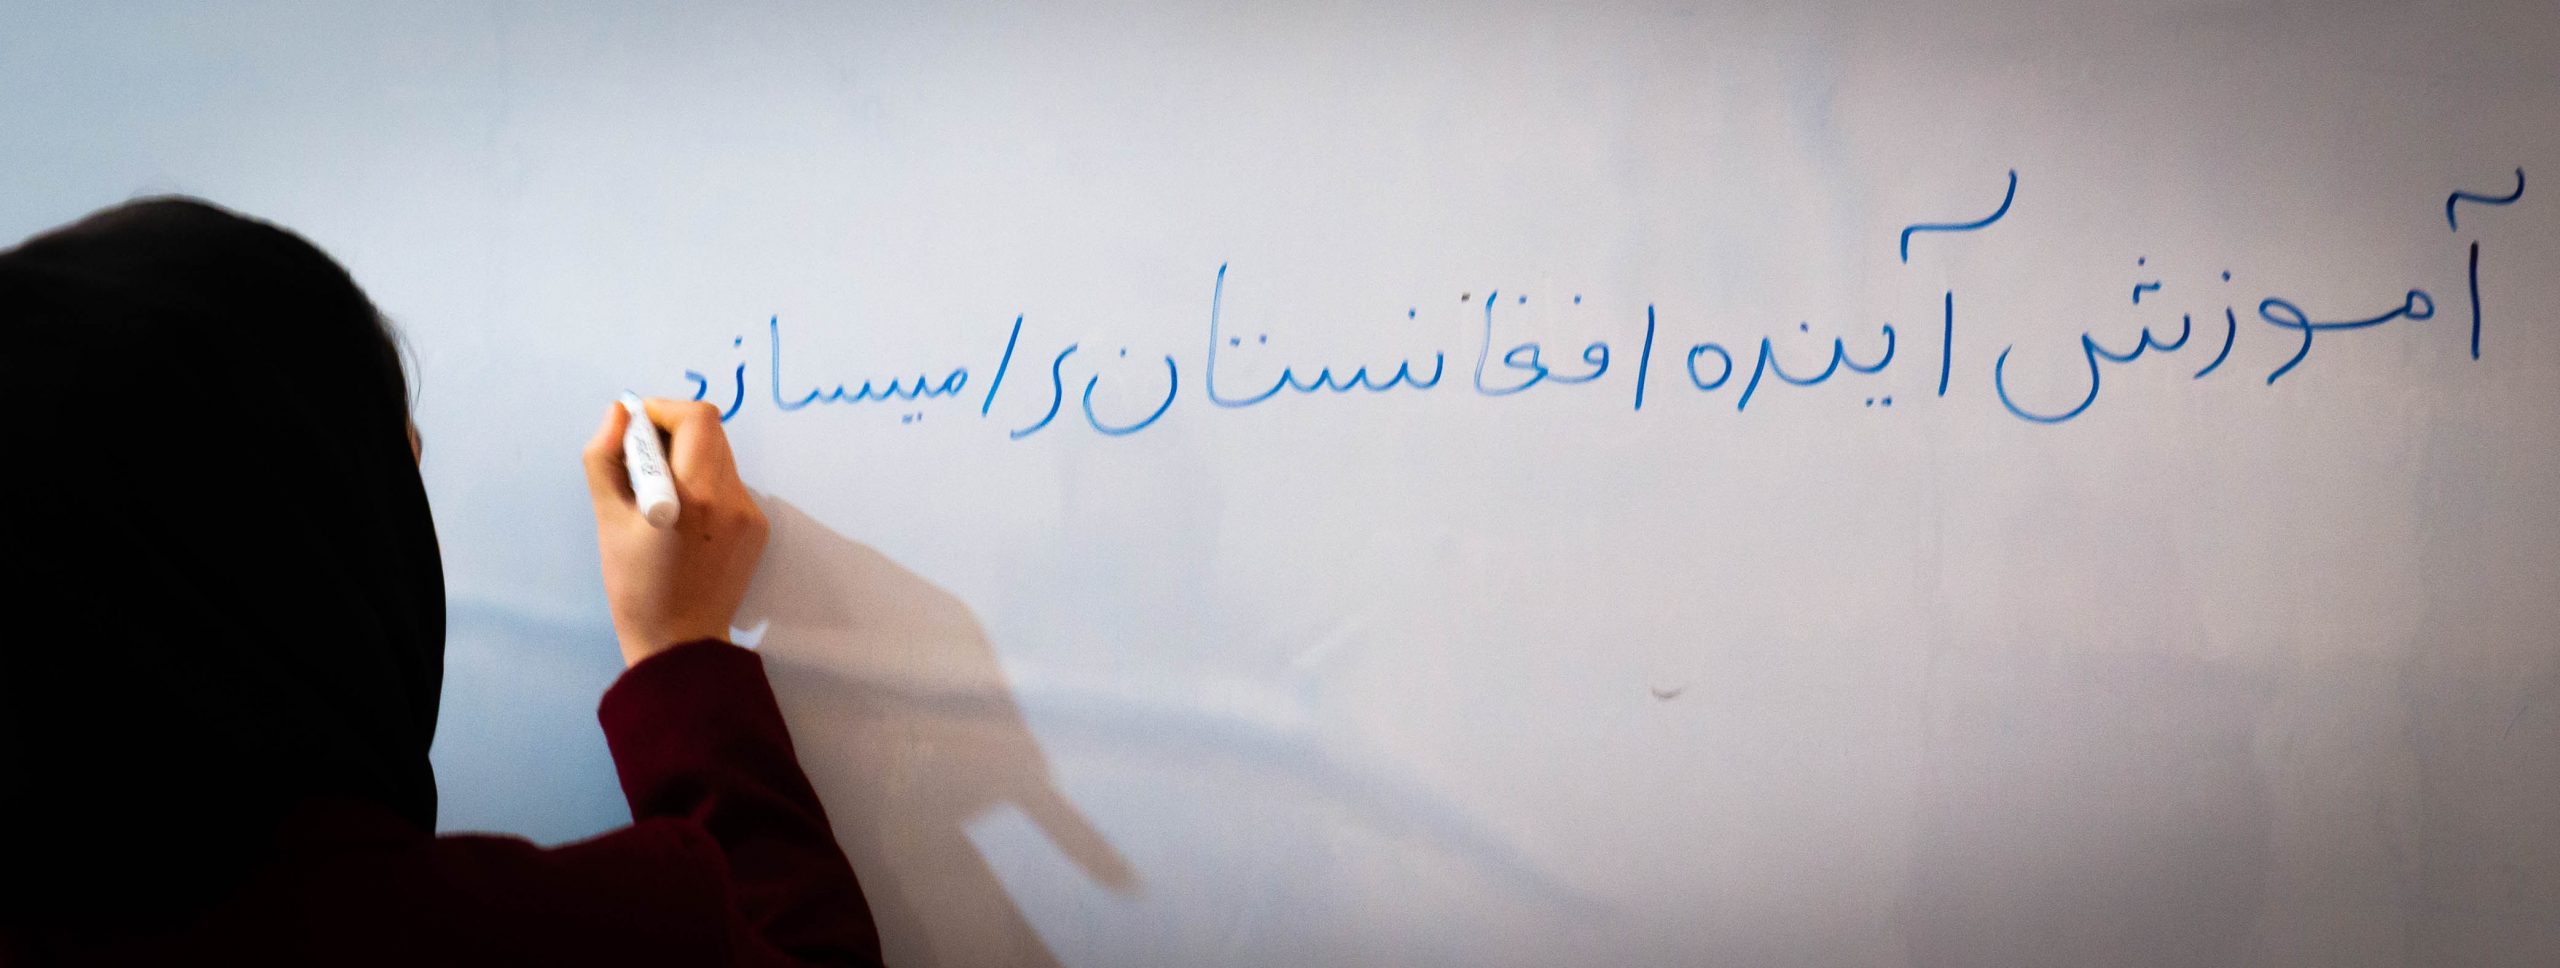 FTEP-trainee writes Education is the future of Afghanistan on the whiteboard